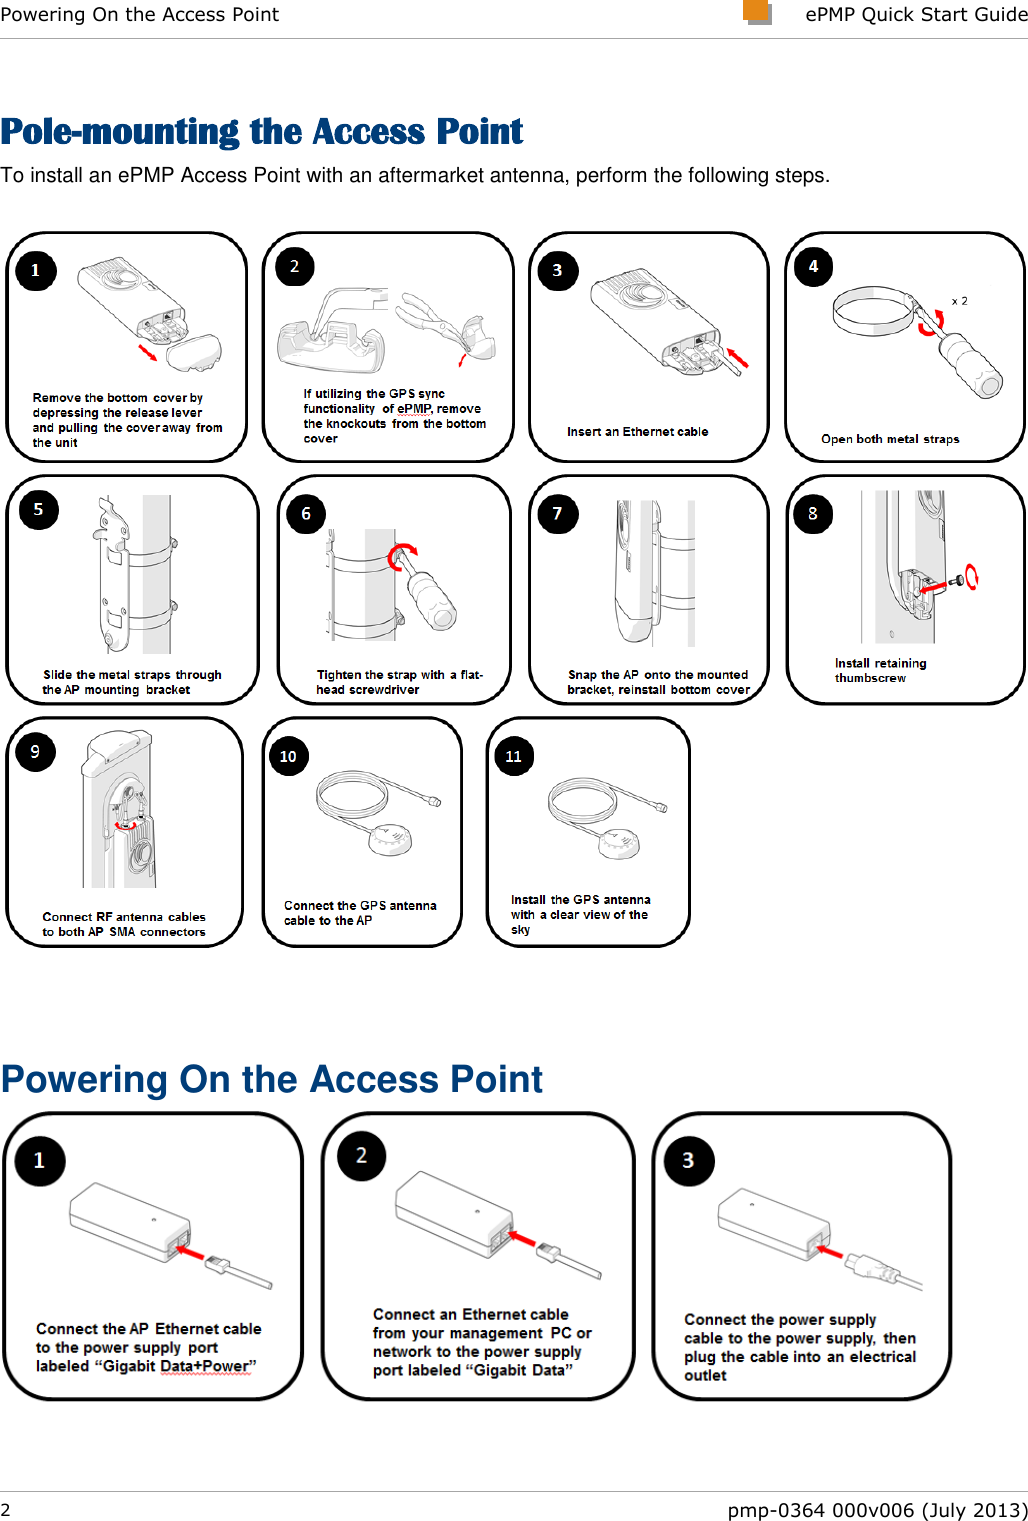 Powering On the Access Point     ePMP Quick Start Guide  2  pmp-0364 000v006 (July 2013)  Pole-mounting the Access Point To install an ePMP Access Point with an aftermarket antenna, perform the following steps.     Powering On the Access Point  